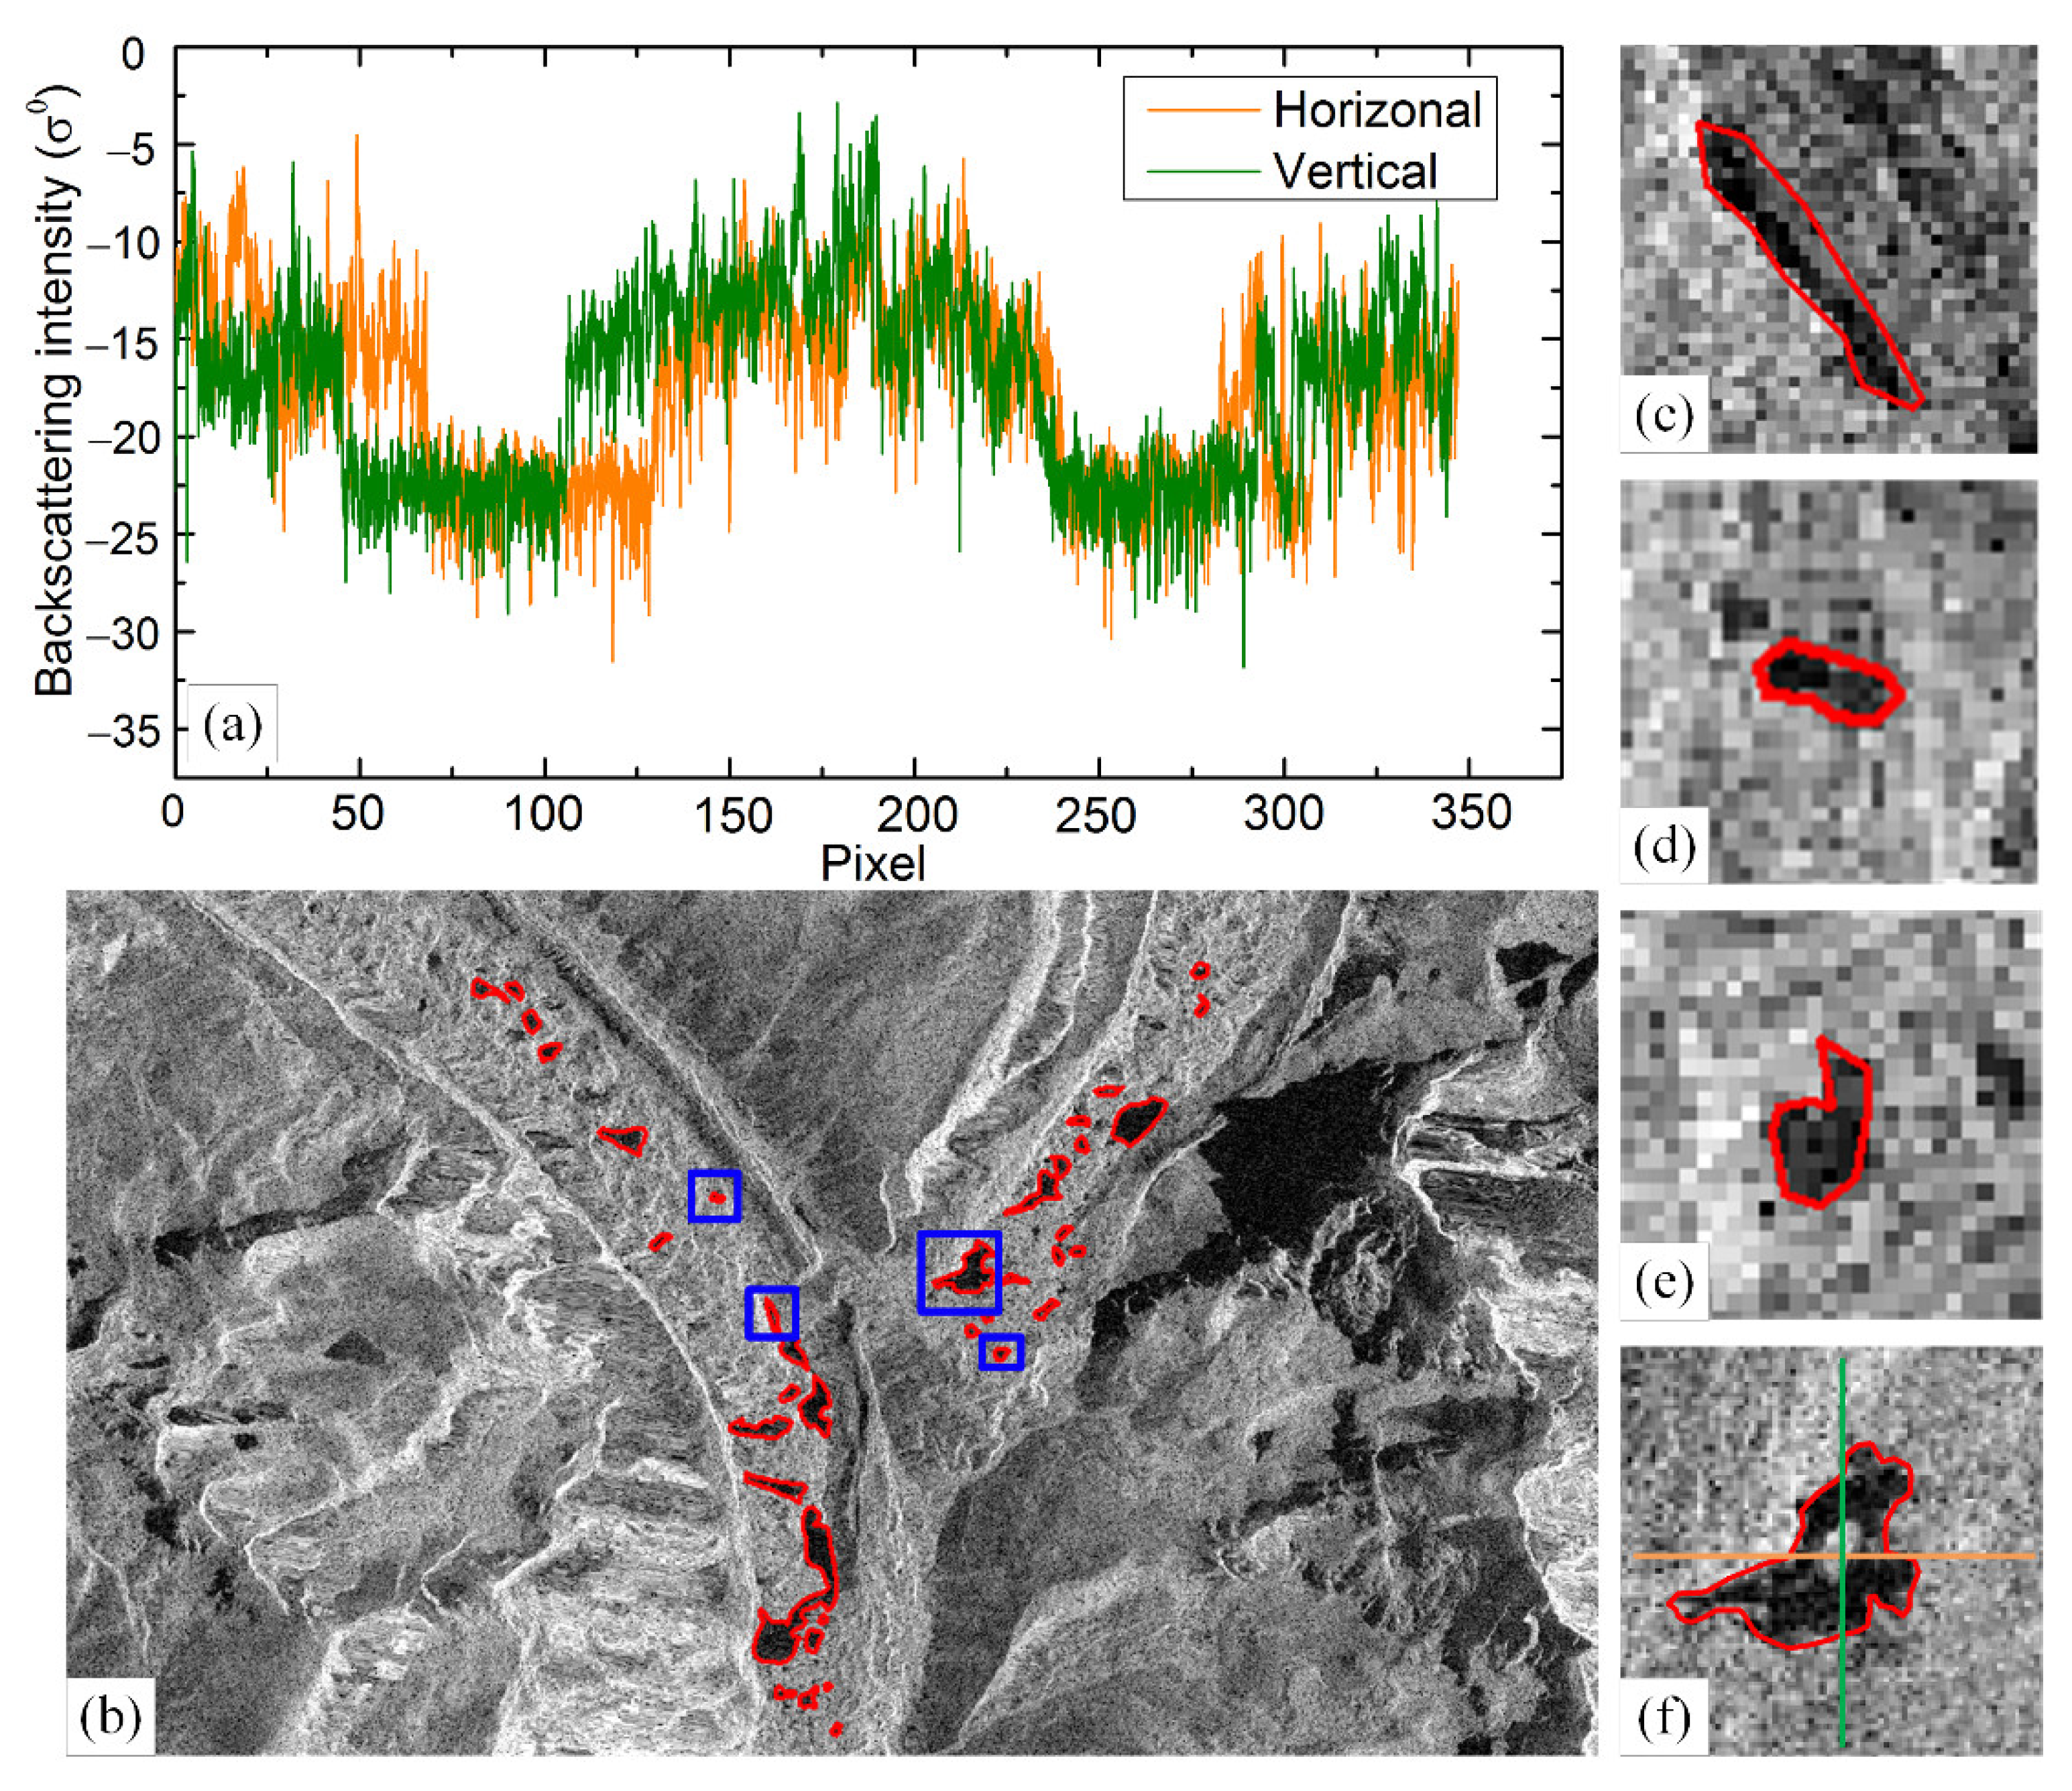 Remote Sensing | Free Full-Text | Comparing Methods for Segmenting Supra-Glacial  Lakes and Surface Features in the Mount Everest Region of the Himalayas  Using Chinese GaoFen-3 SAR Images | HTML